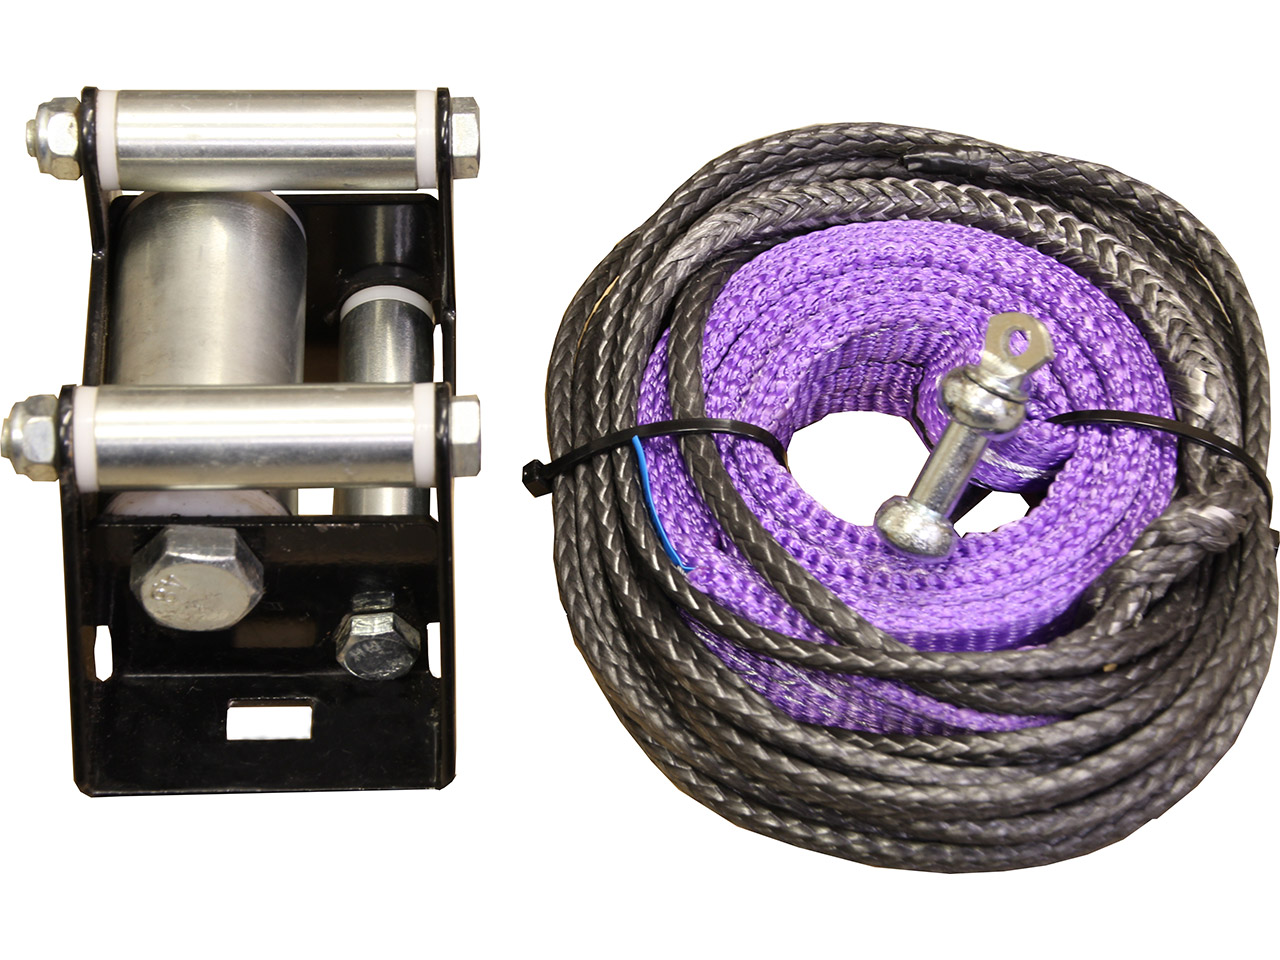 Plow lift strap kit: for a winch